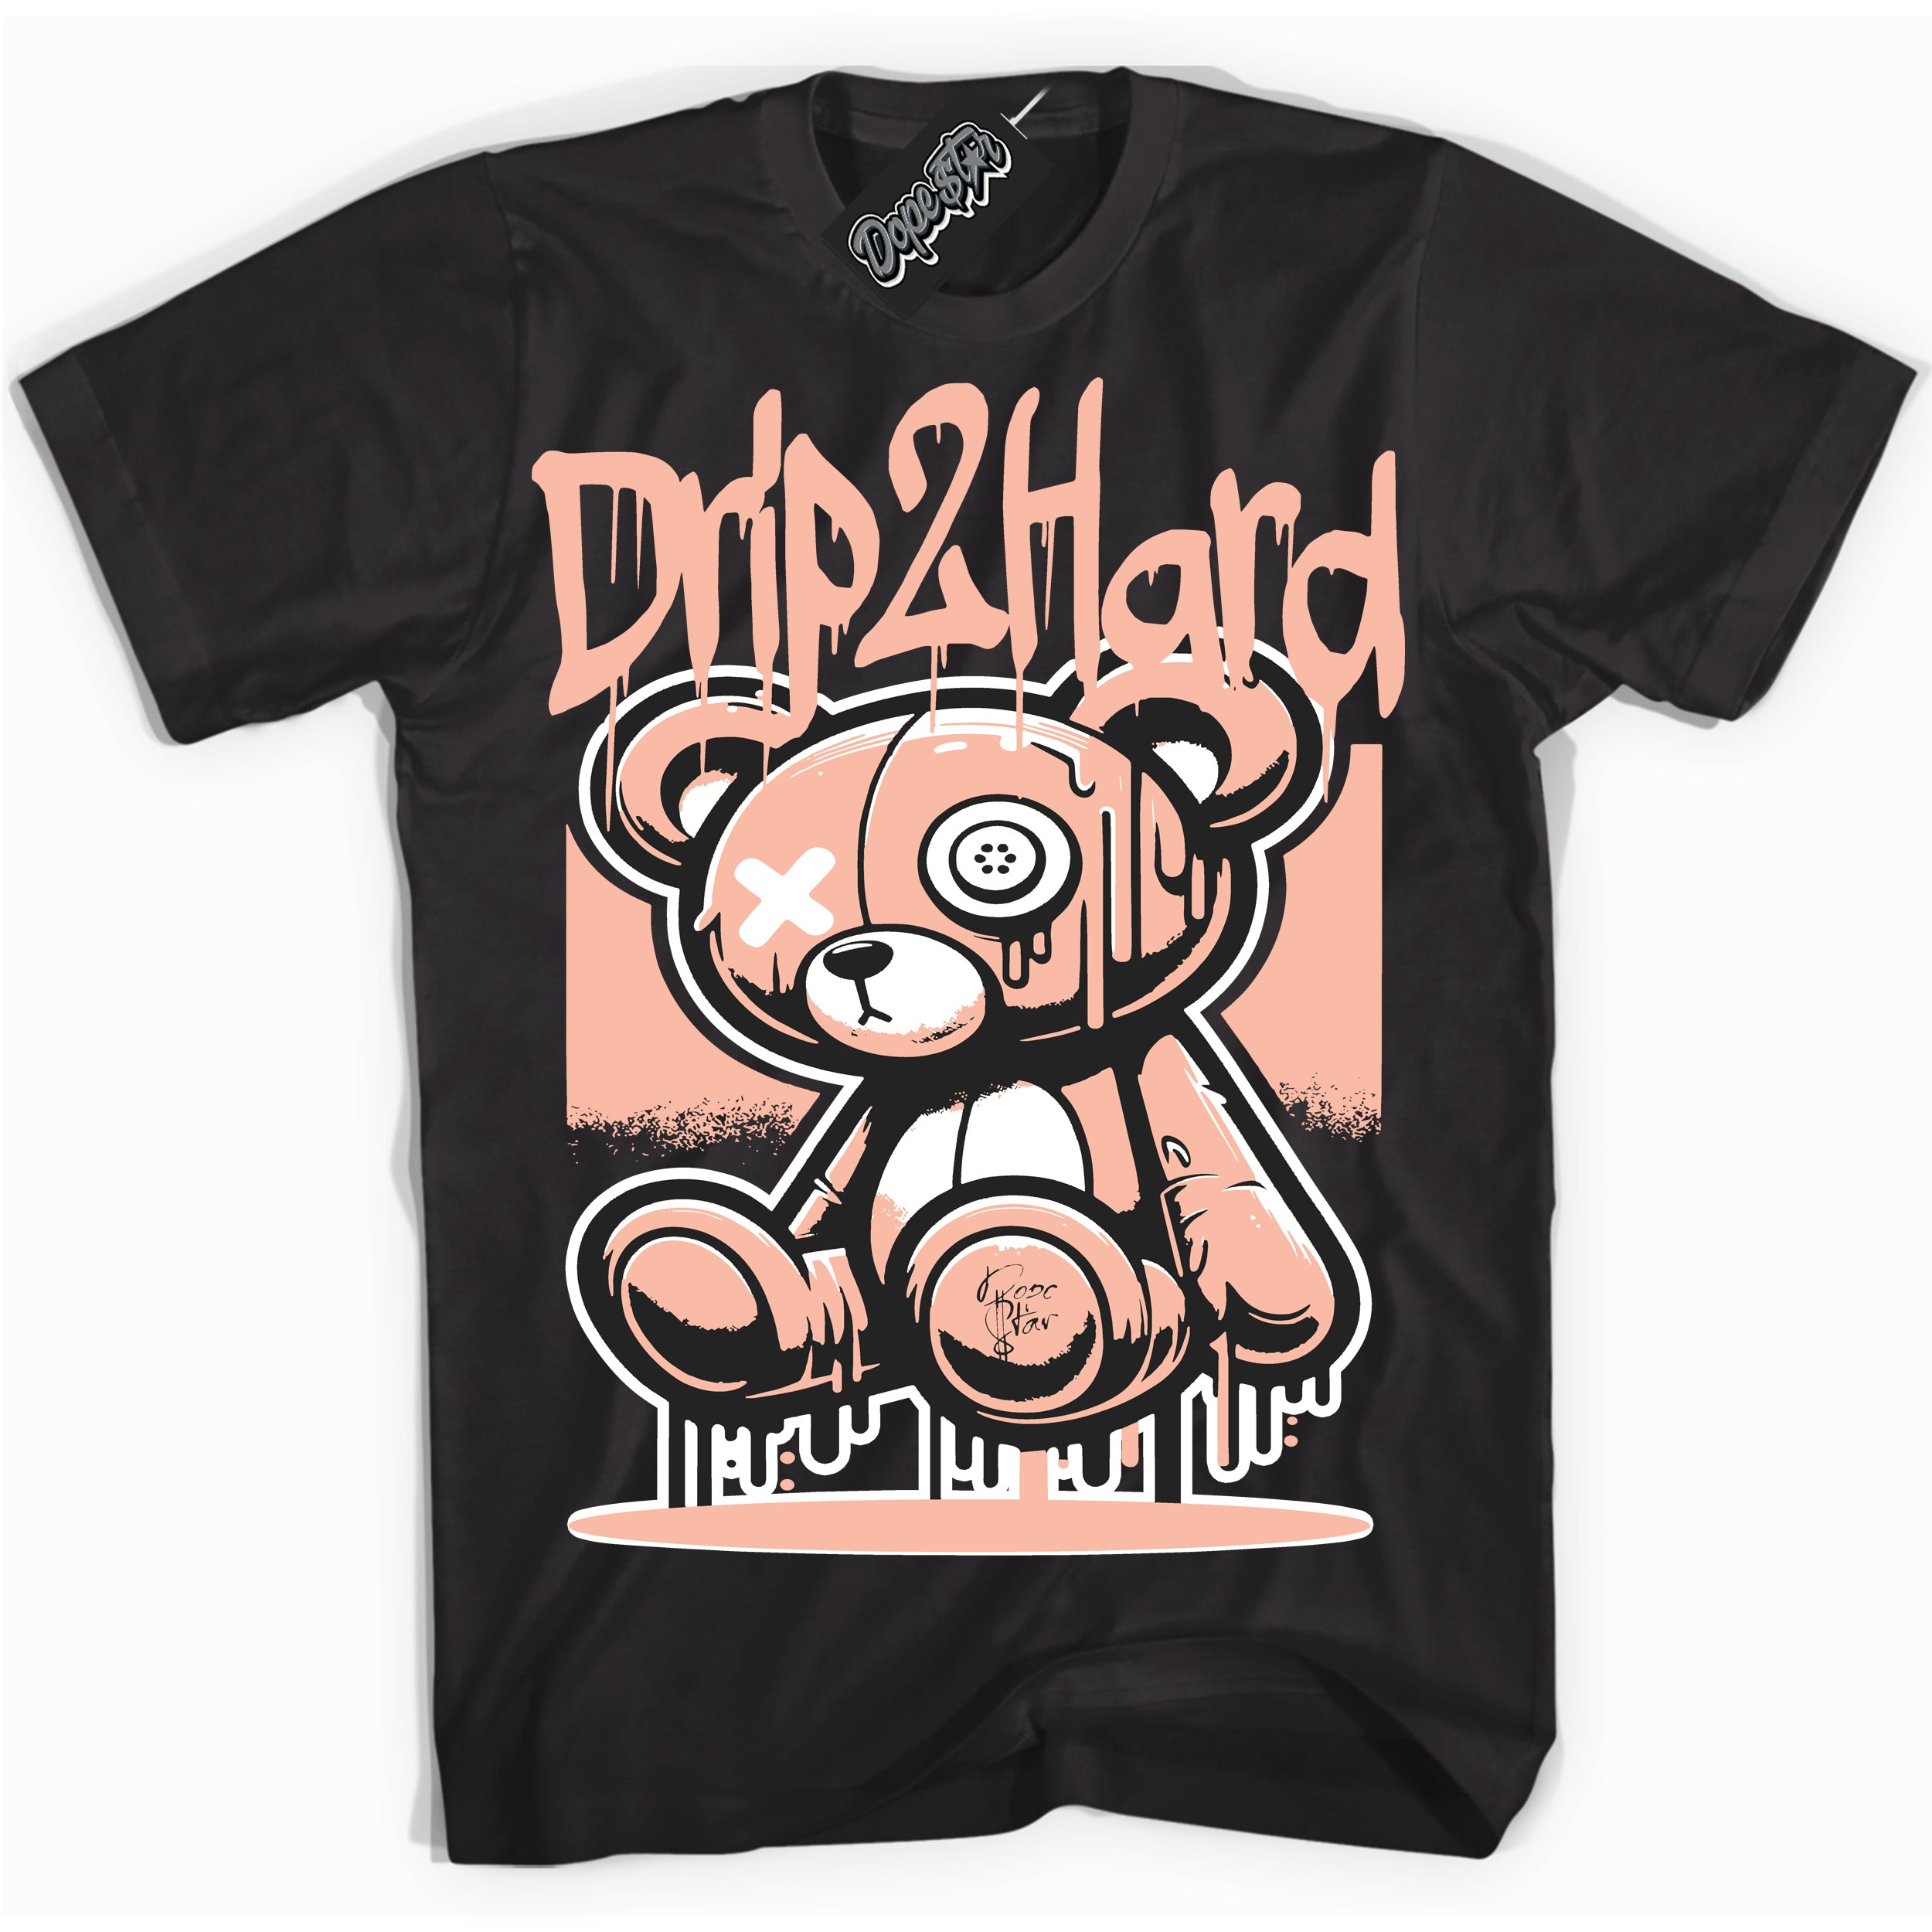 Cool Black graphic tee with “ Drip 2 Hard ” design, that perfectly matches Arctic Orange 1s